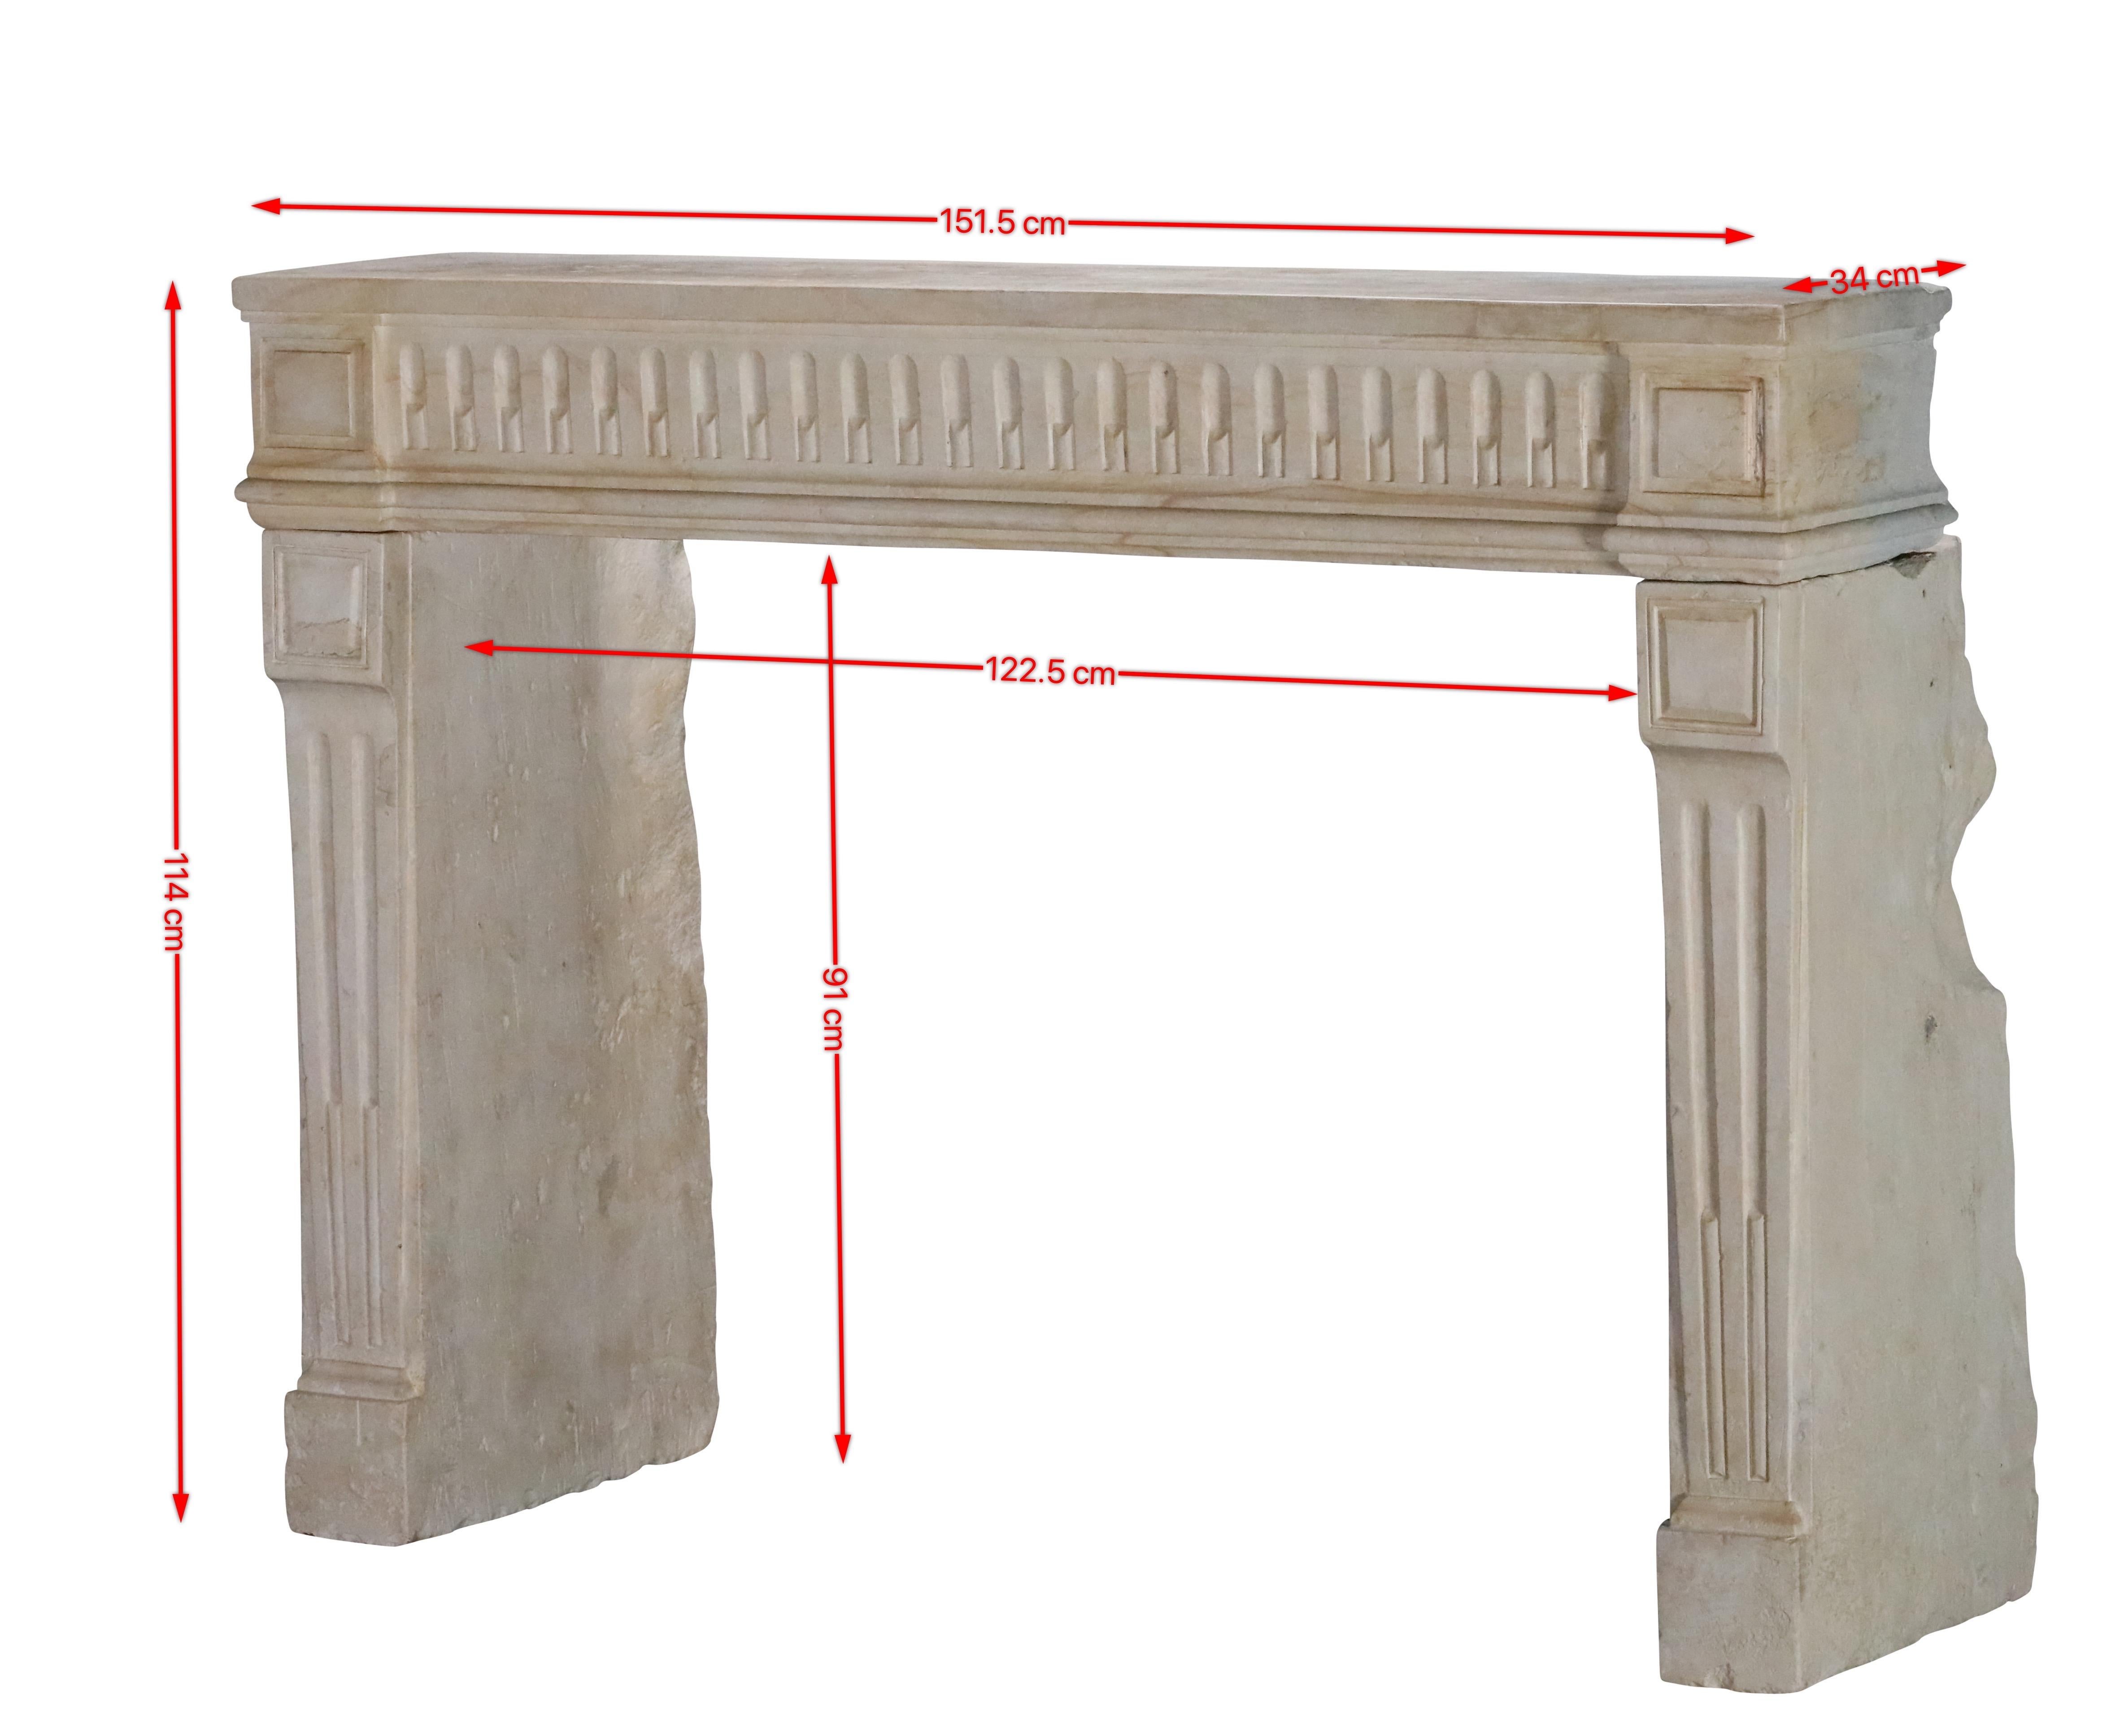 Unusual exceptional French limestone fireplace surround from the Louis XVI period. 18th century building element with some exceptional Artempo wear. This decorative element is the principal ambiance setter in any room.
Measurements:
151,5 cm